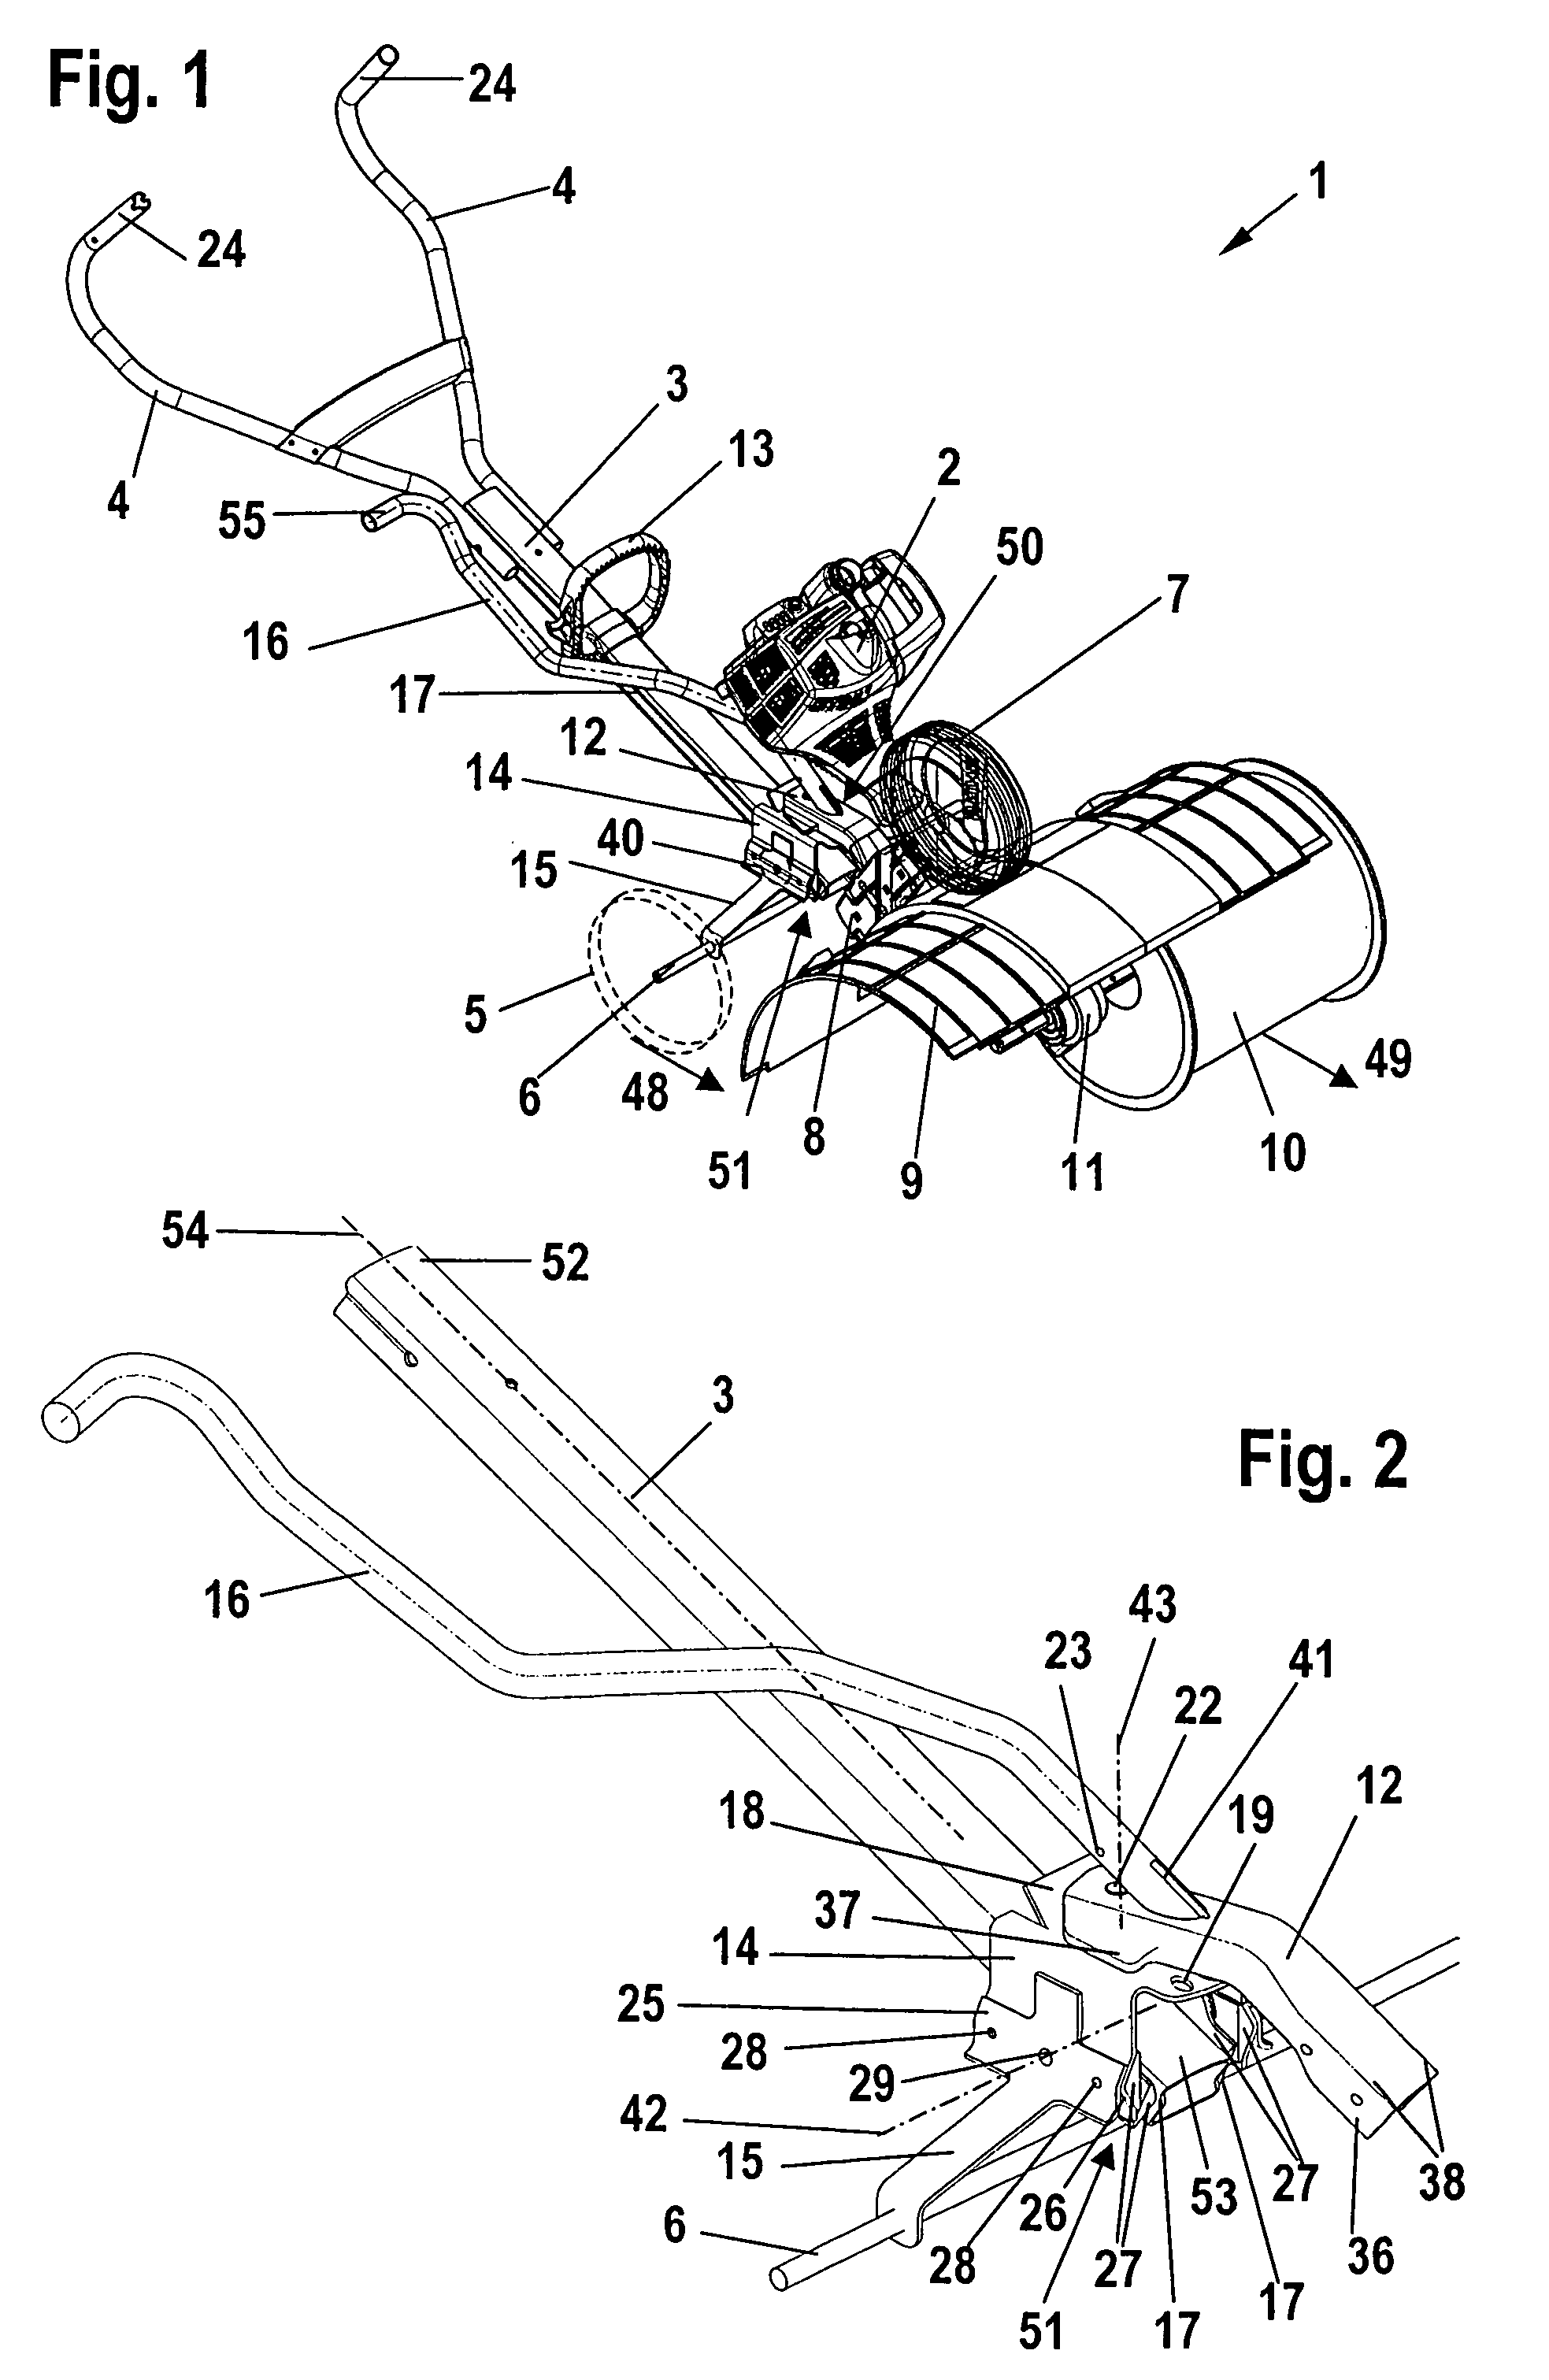 Hand-guided sweeper